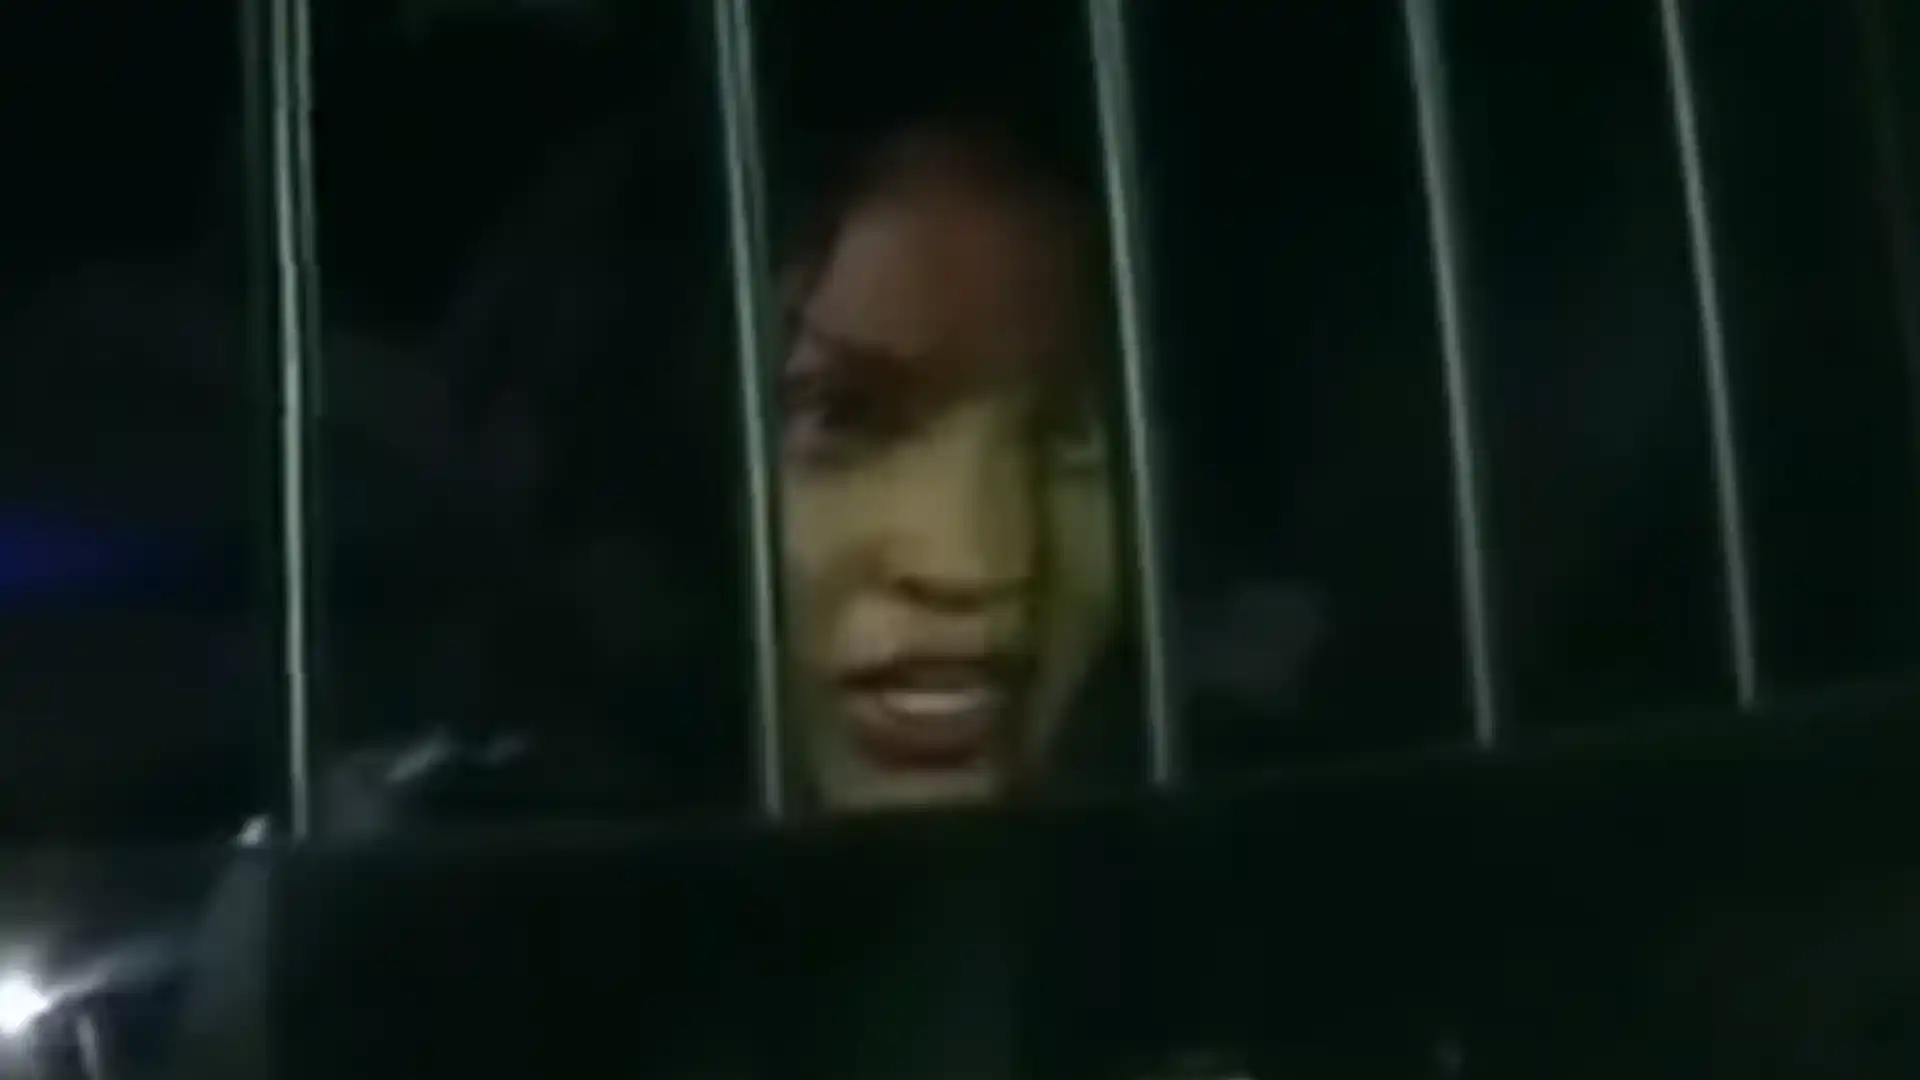 "Joseline Hernandez sitting in the back of a police car - Exclusive video released by Lions Ground